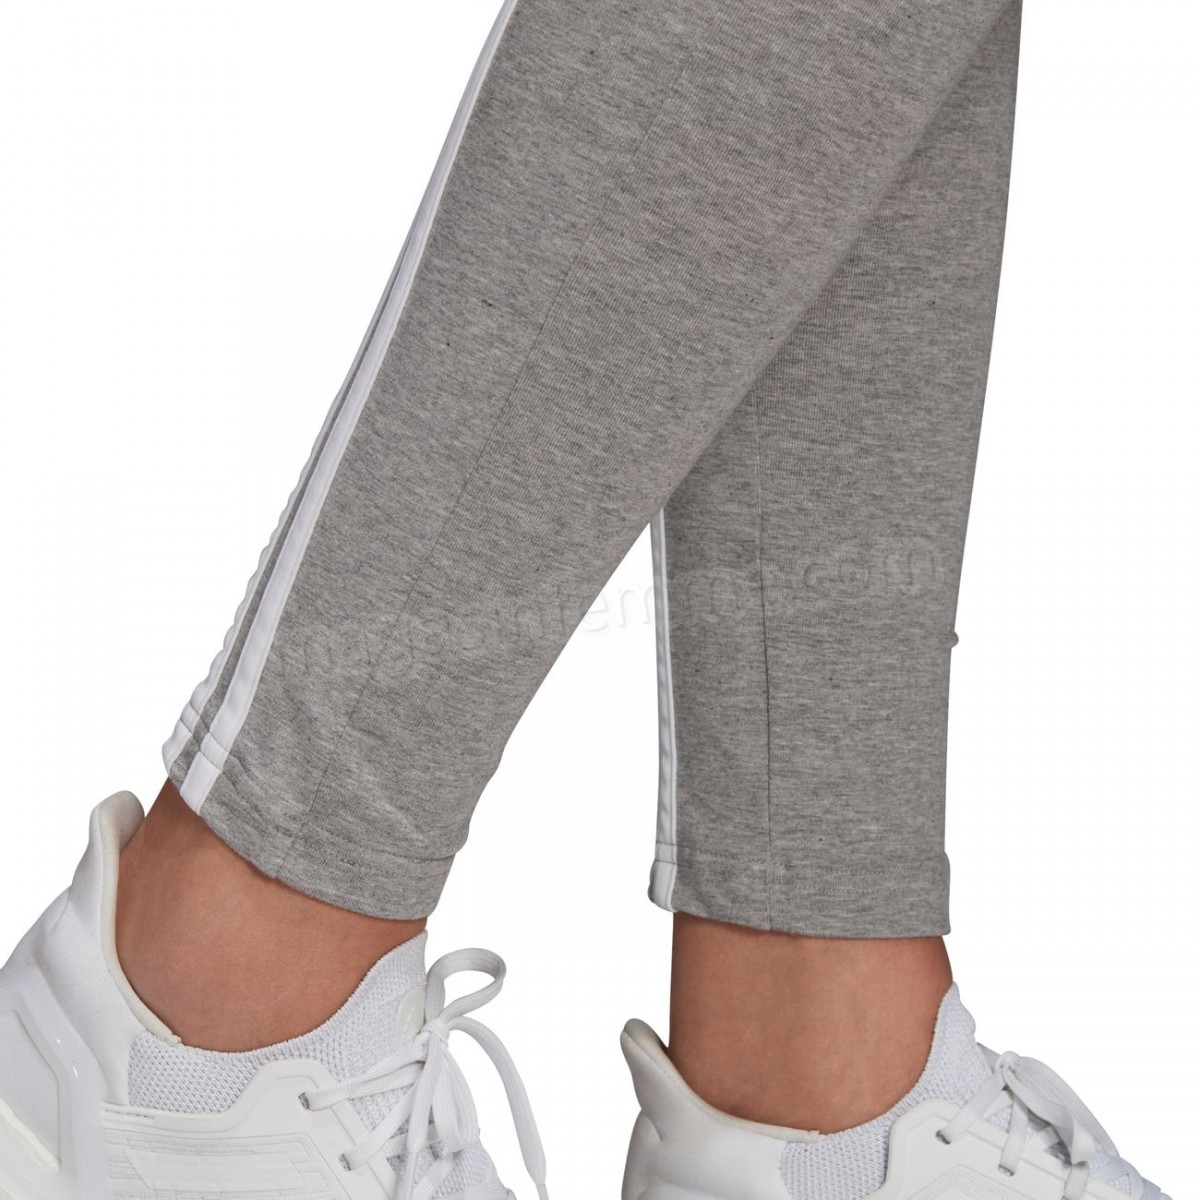 Adidas-Fitness femme ADIDAS Collant femme adidas Must Haves 3-Stripes en solde - -17